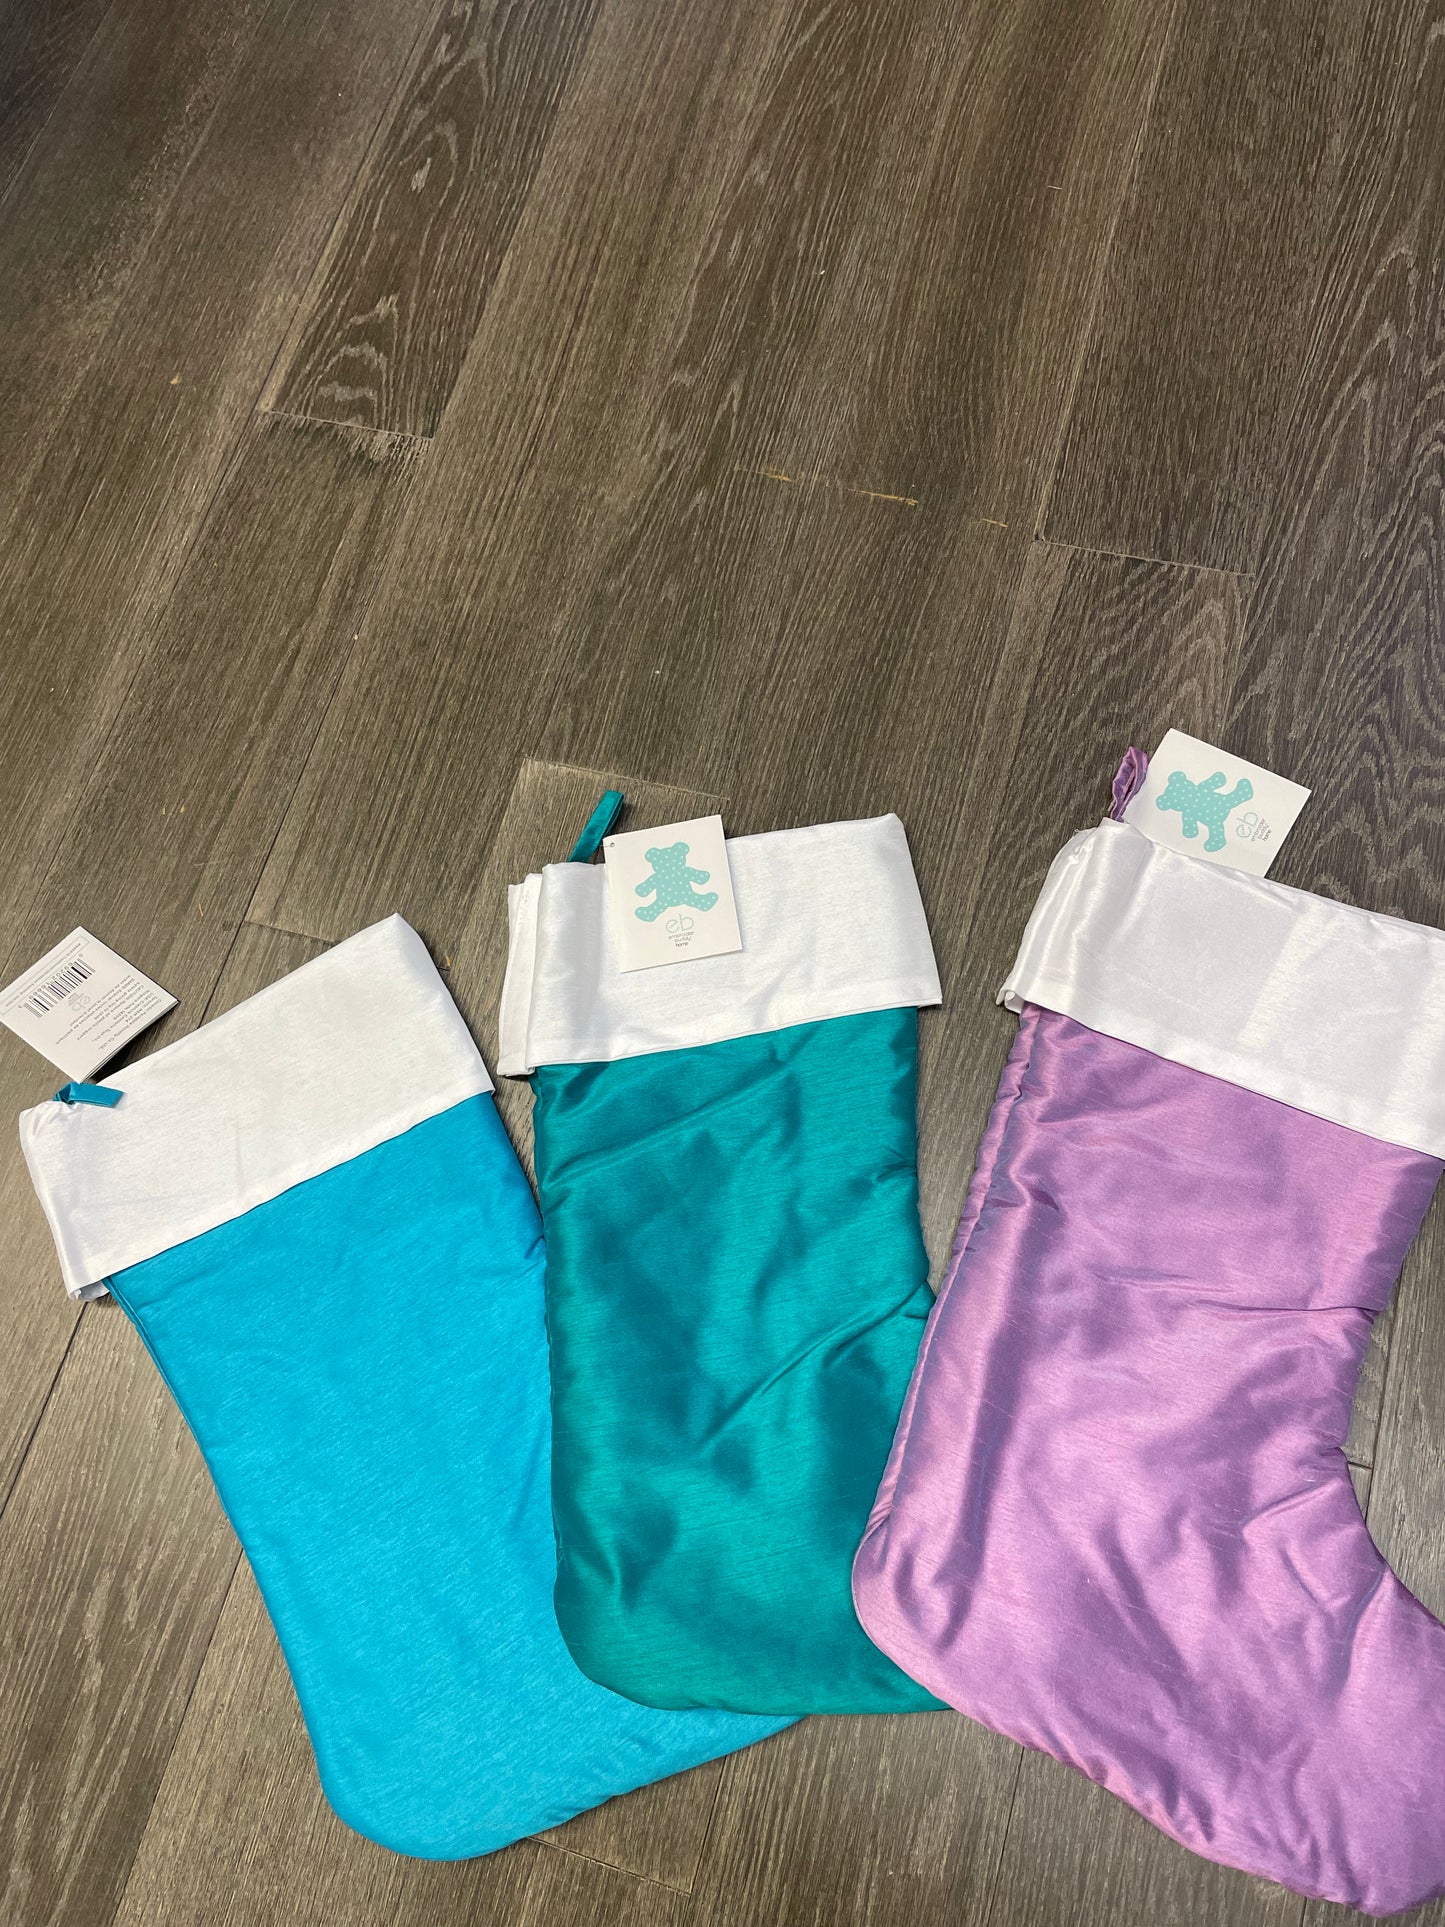 Embroider Buddy Satin Stocking - Teal Blue